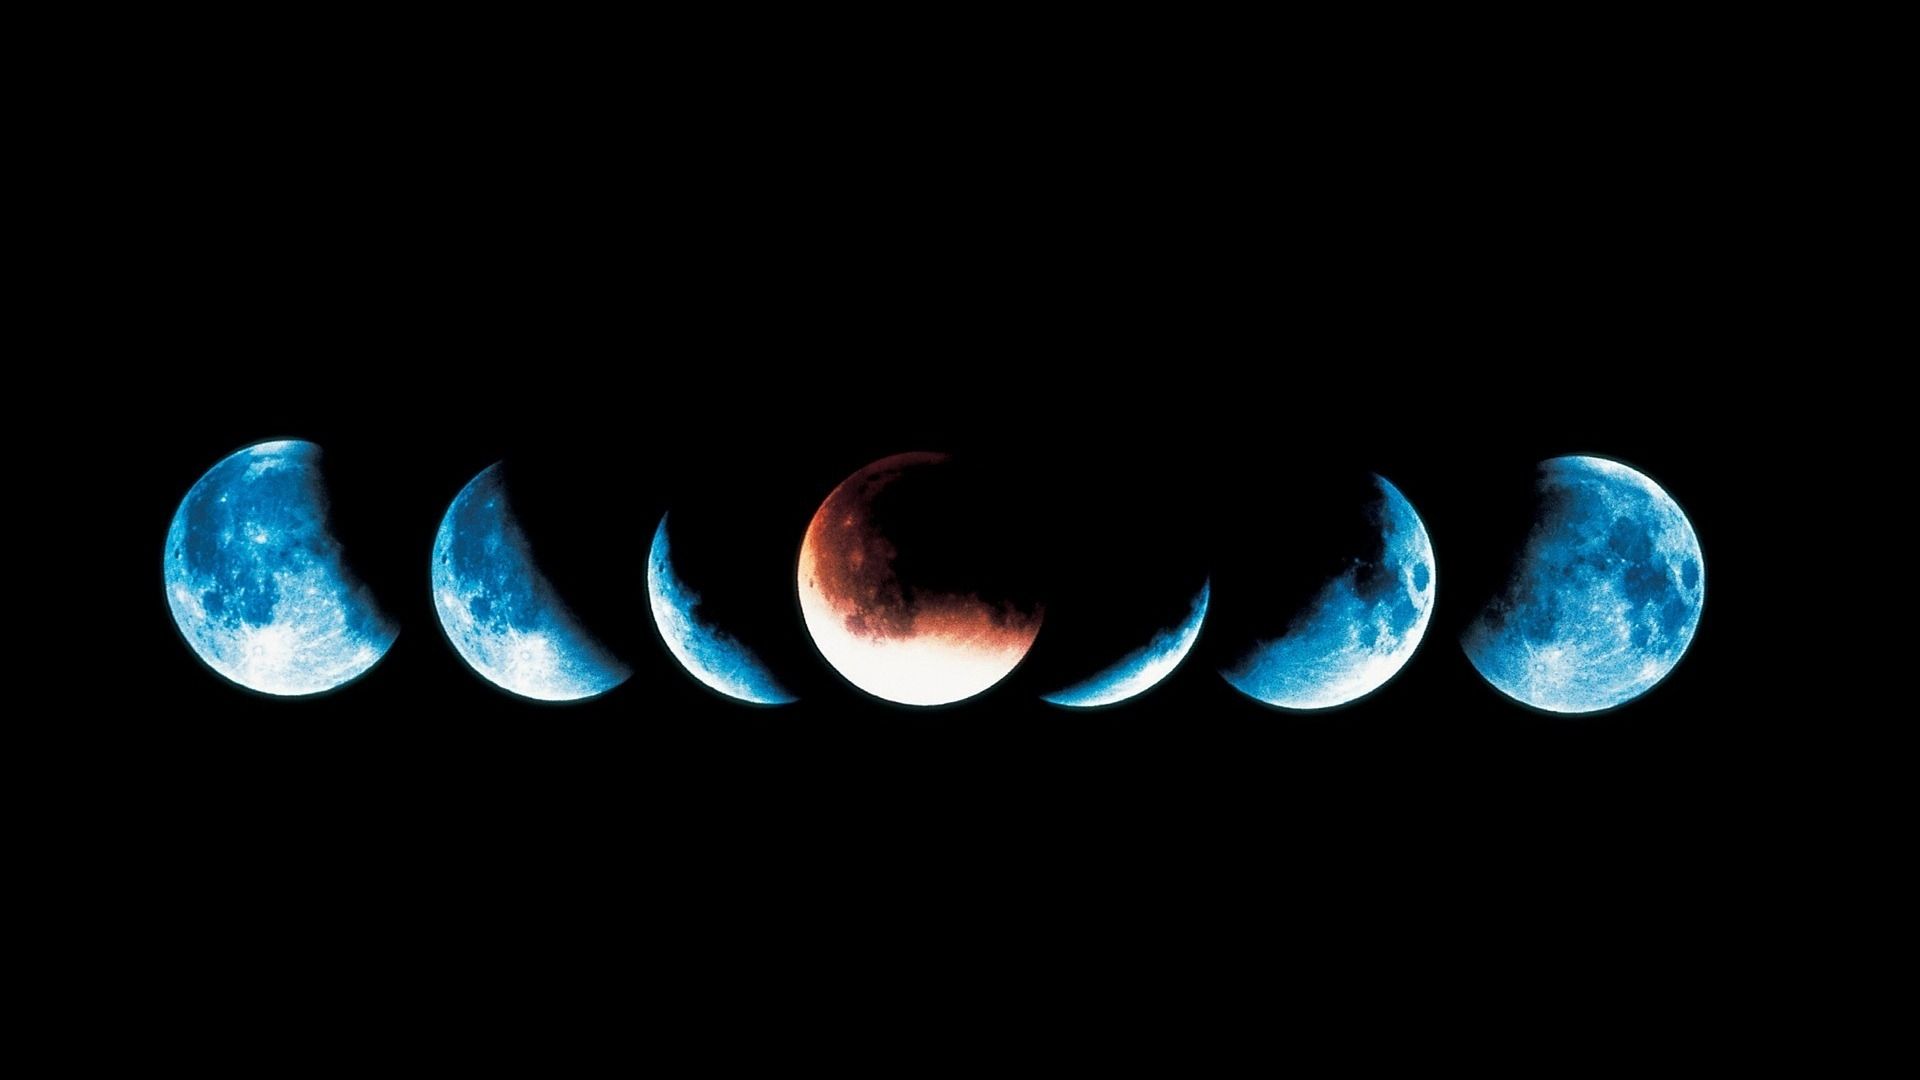 A series of images showing the phases in which an eclipse occurs - Moon phases